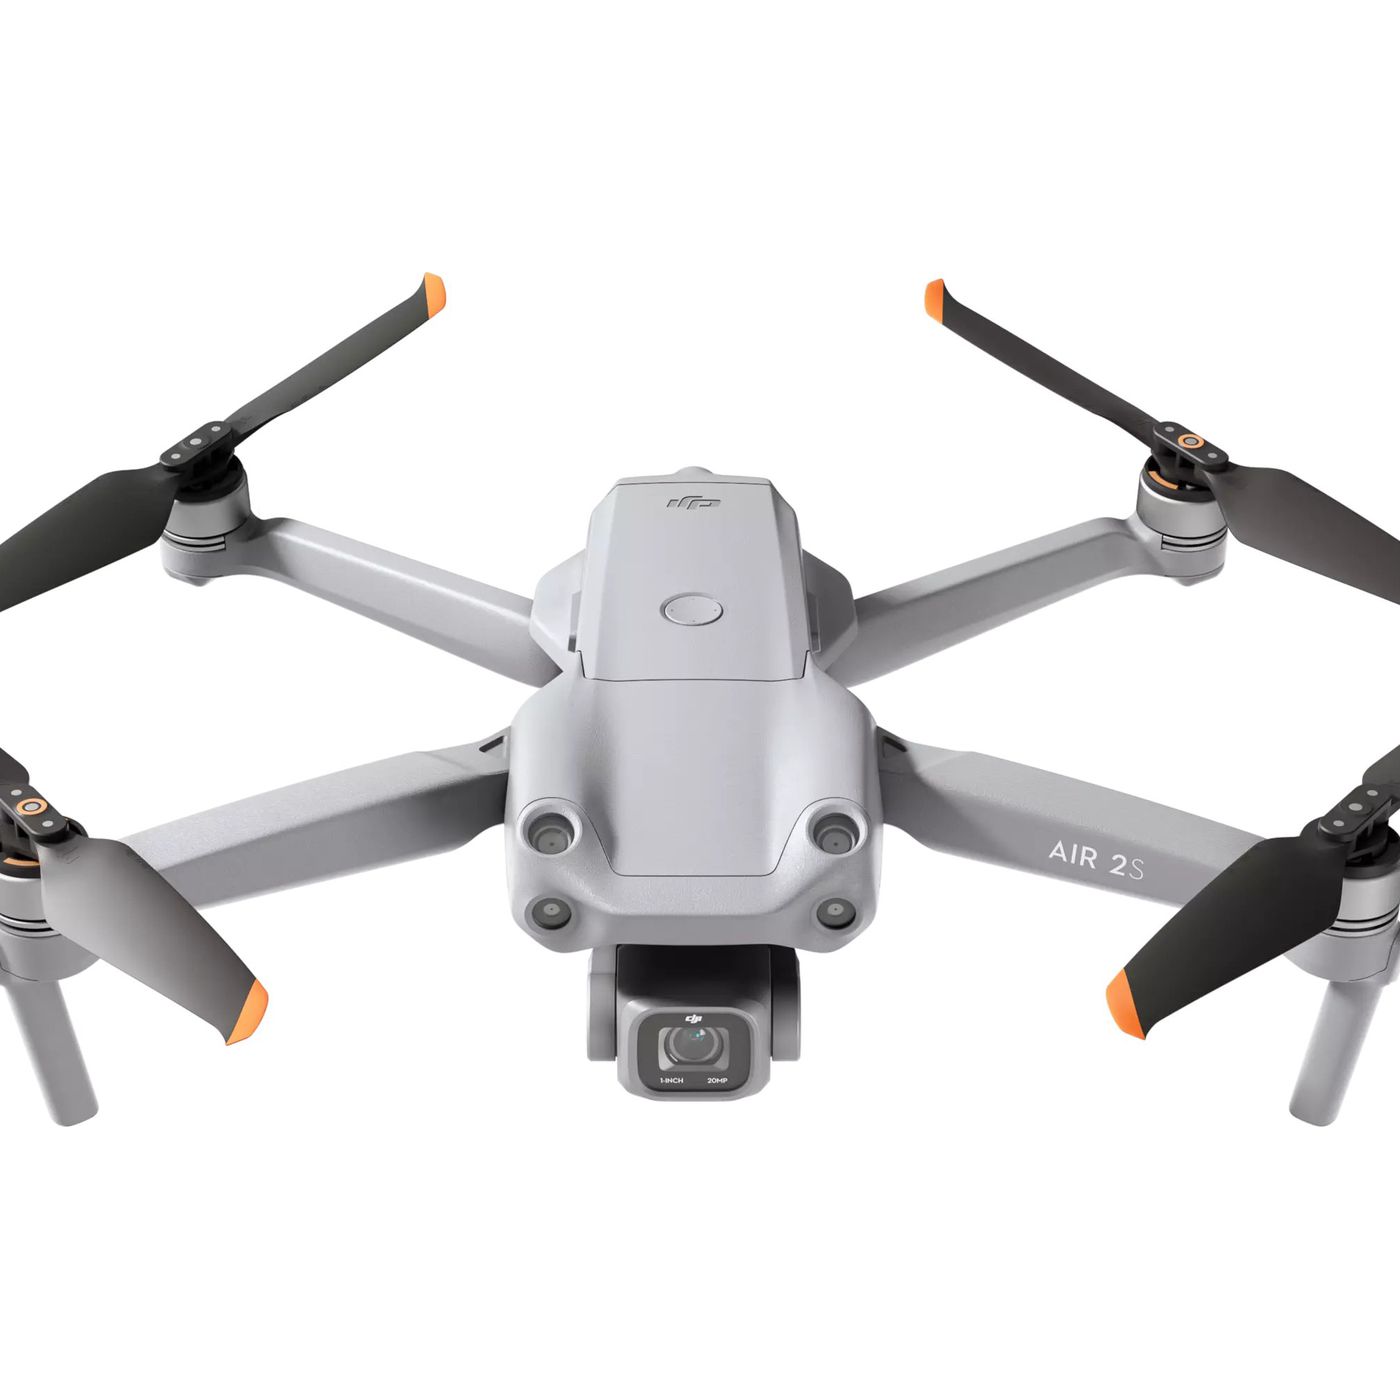 DJI Air 2S with improved camera sensor leaks in new images - The Verge